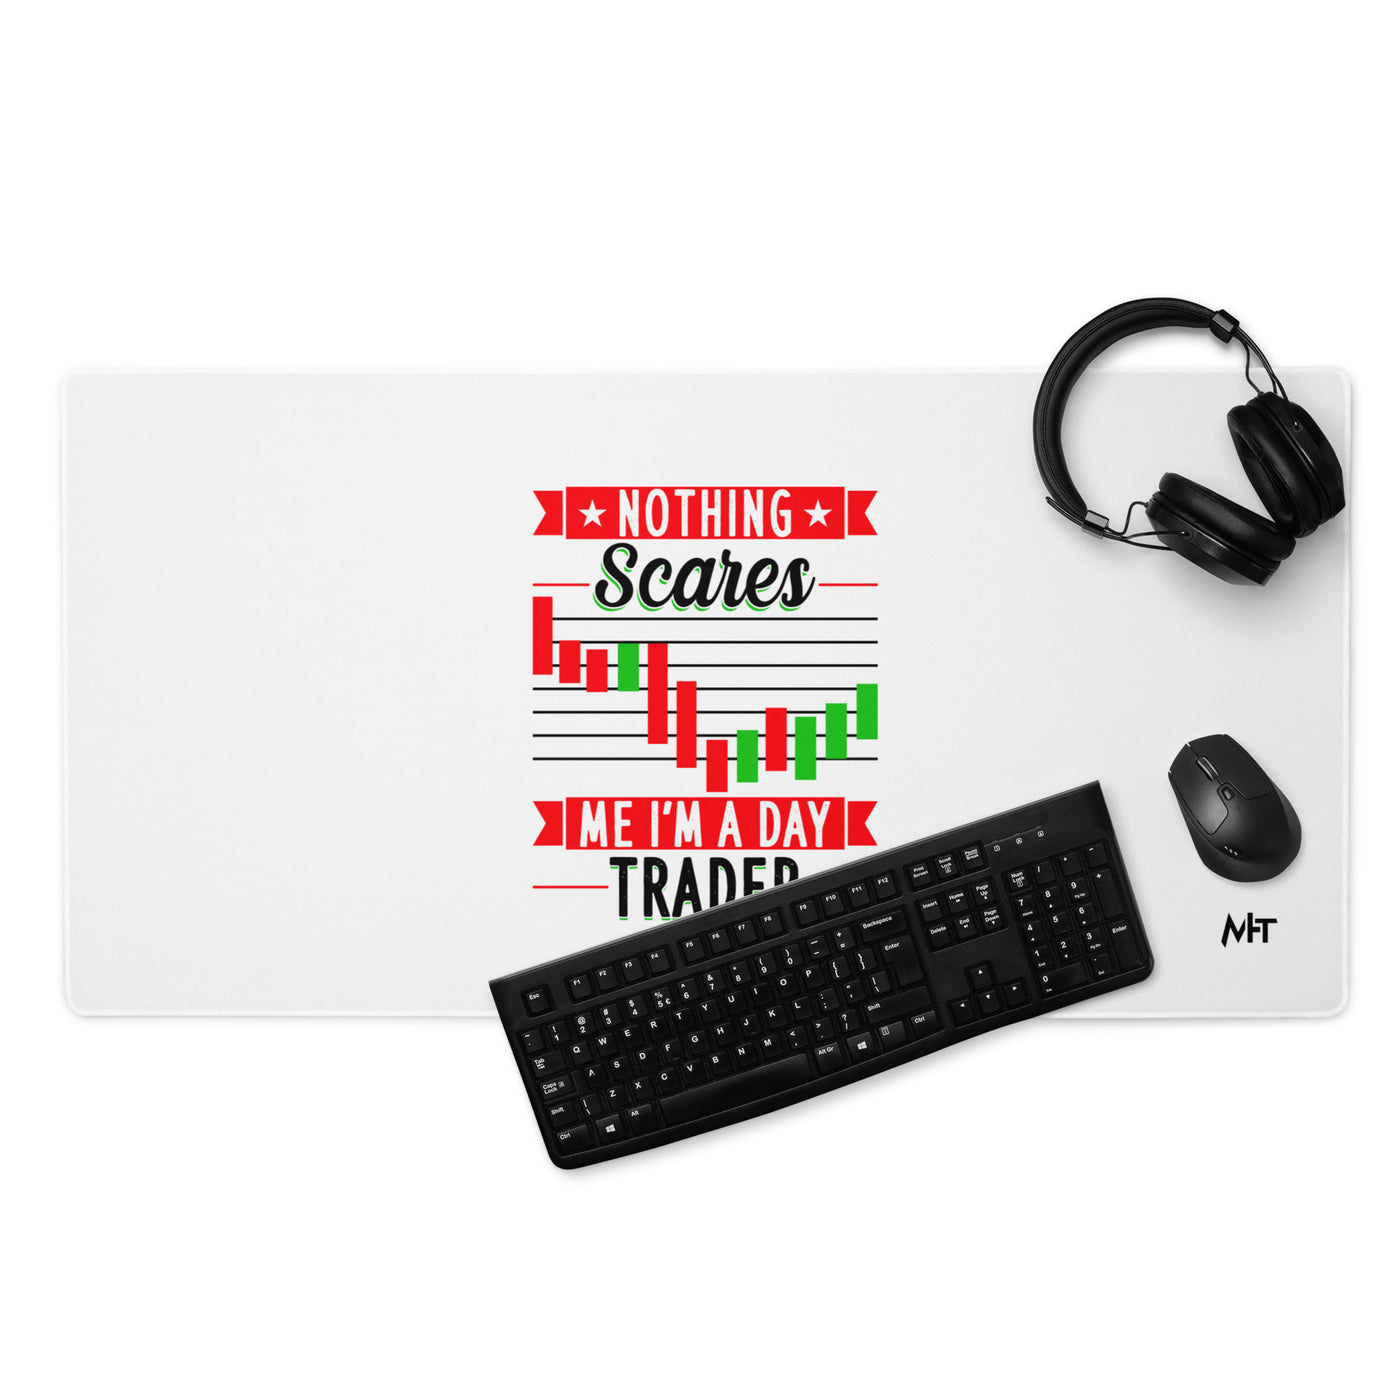 Nothing Scares me; I Am a Day Trader in Dark Text - Desk Mat